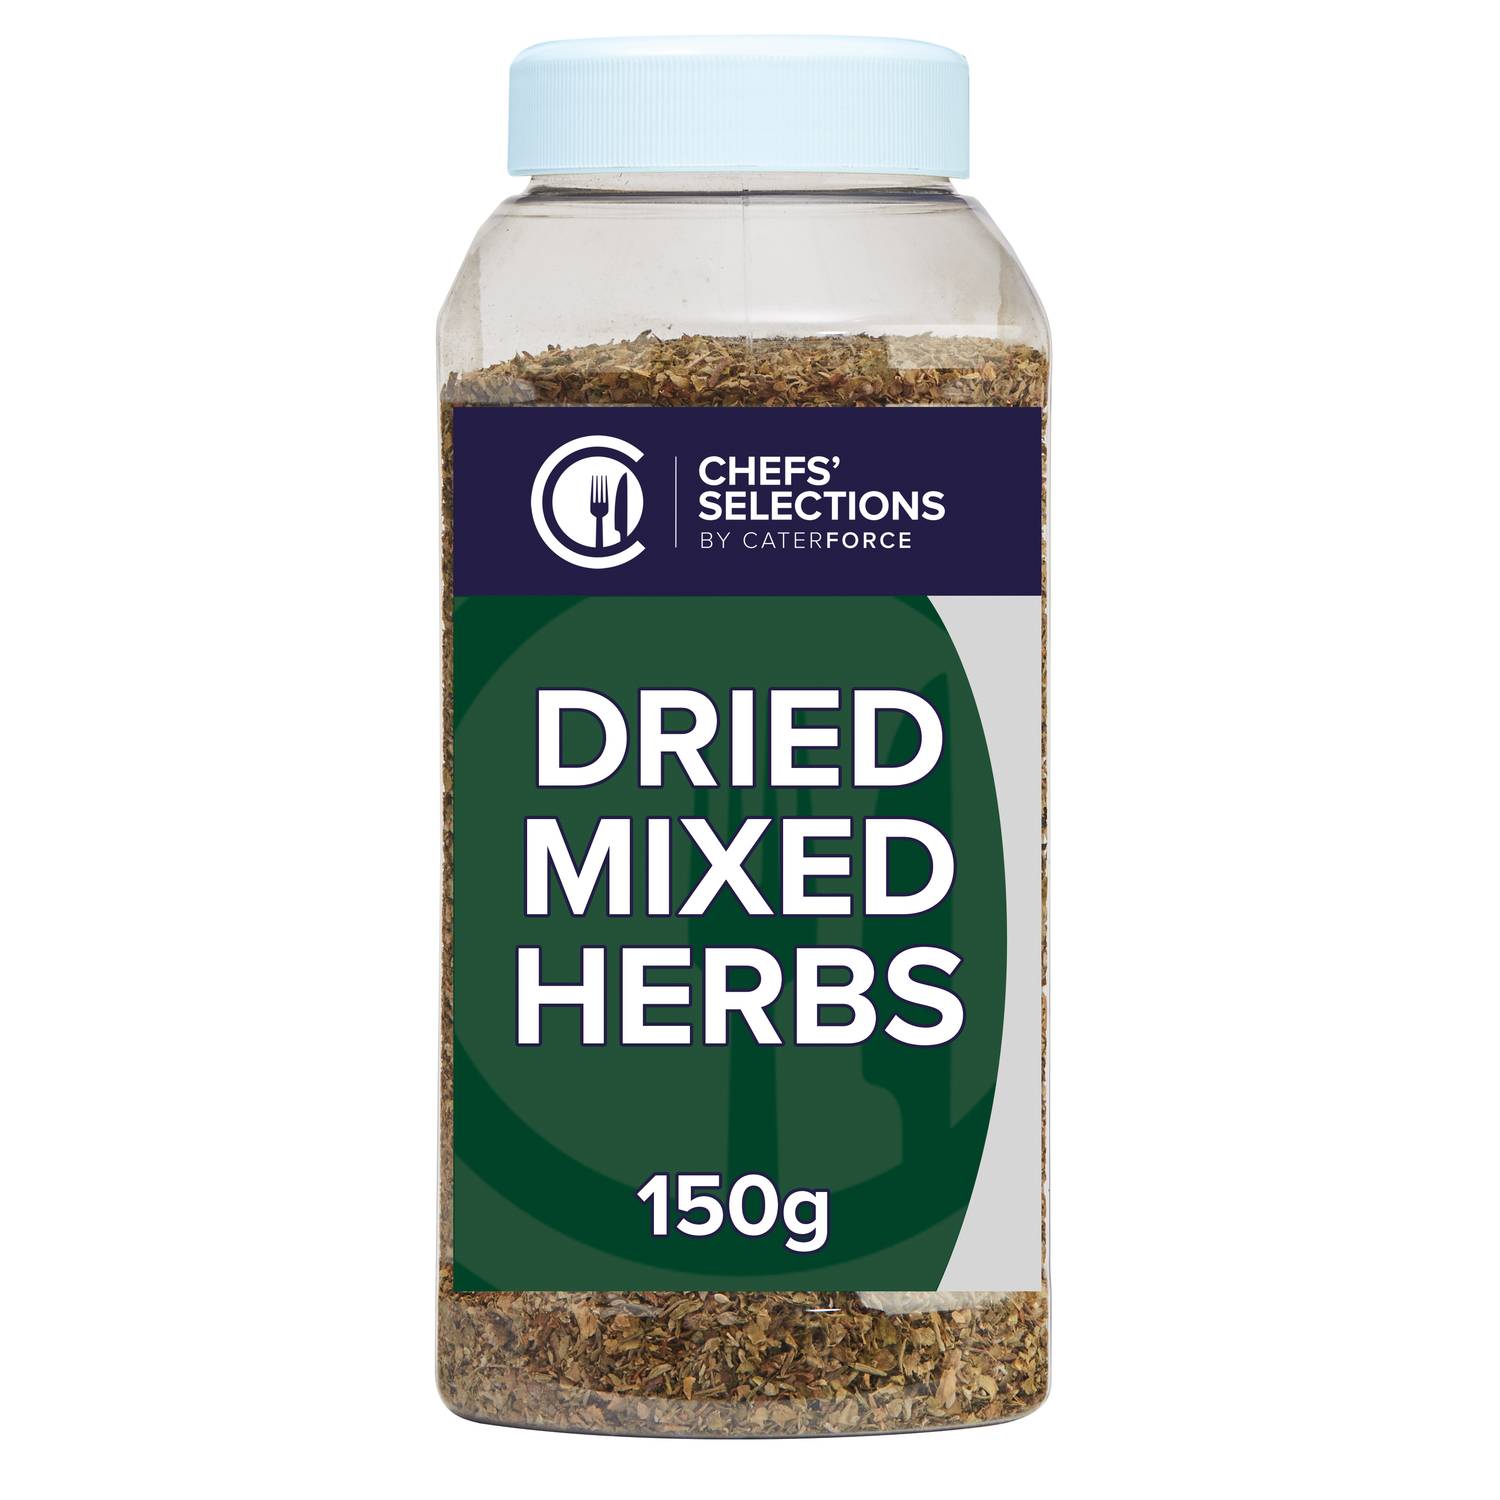 Chefs’ Selections Dried Mixed Herbs (6 x 150g)